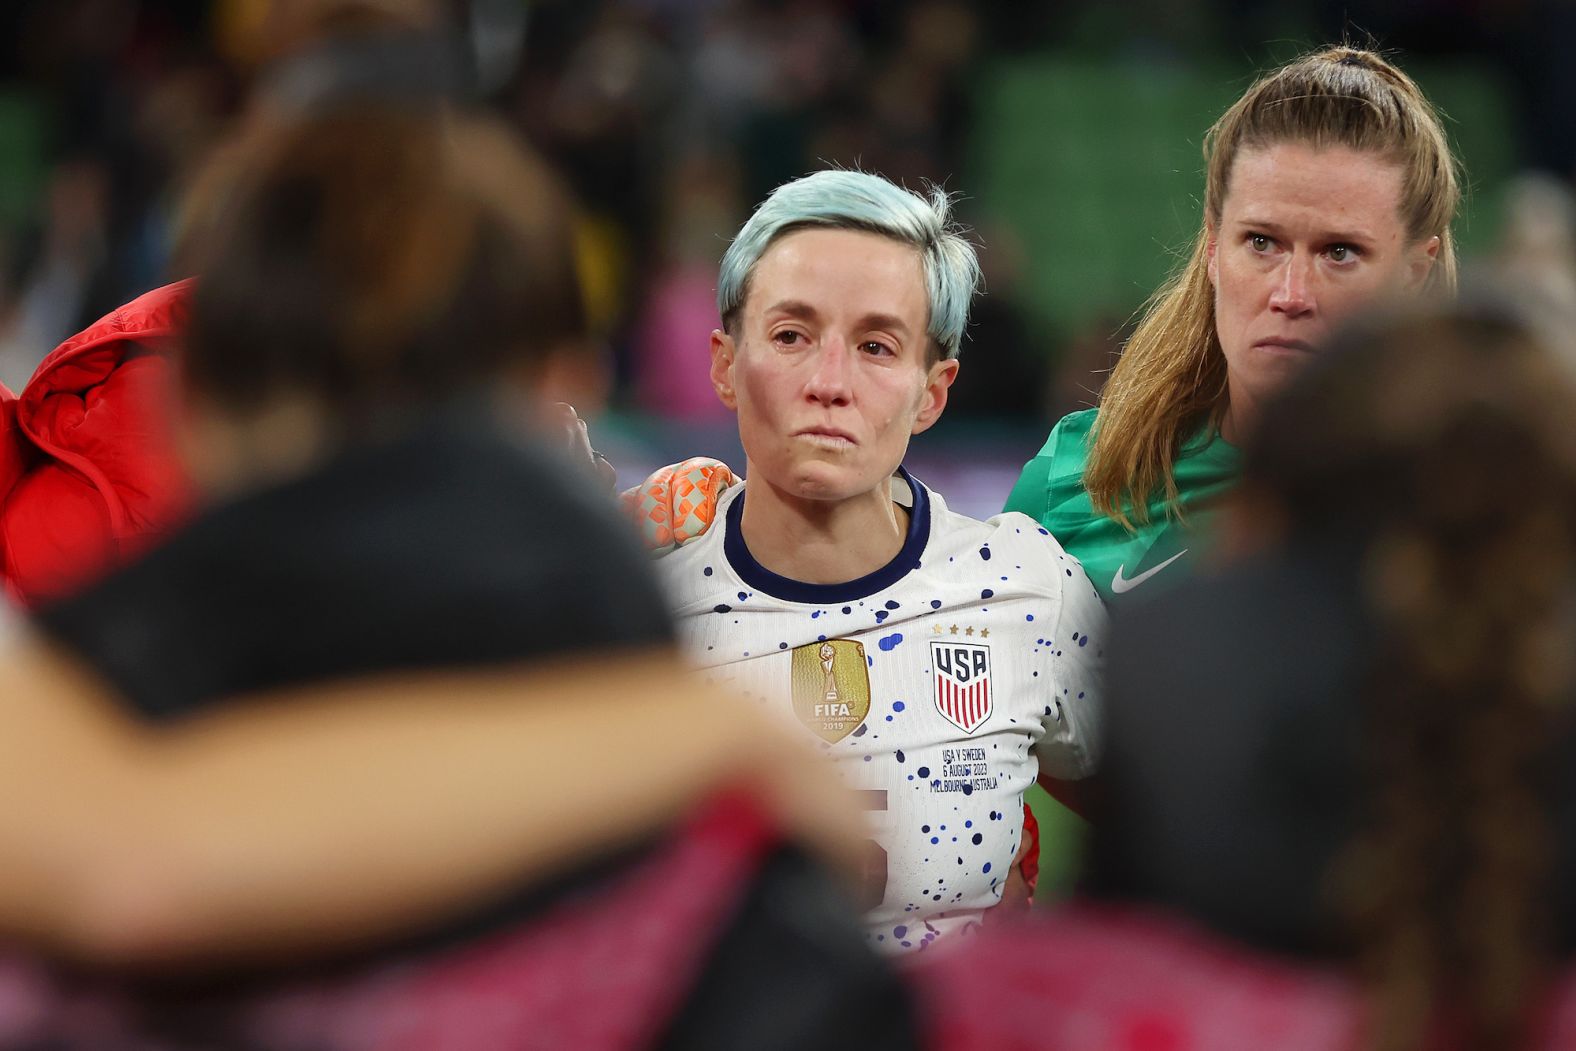 Rapinoe reacts to her team being <a href="index.php?page=&url=https%3A%2F%2Fwww.cnn.com%2F2023%2F08%2F05%2Ffootball%2Fusa-sweden-womens-world-cup-2023-spt-intl%2Findex.html" target="_blank">knocked out of the Women's World Cup</a> after a shootout loss to Sweden in August 2023.